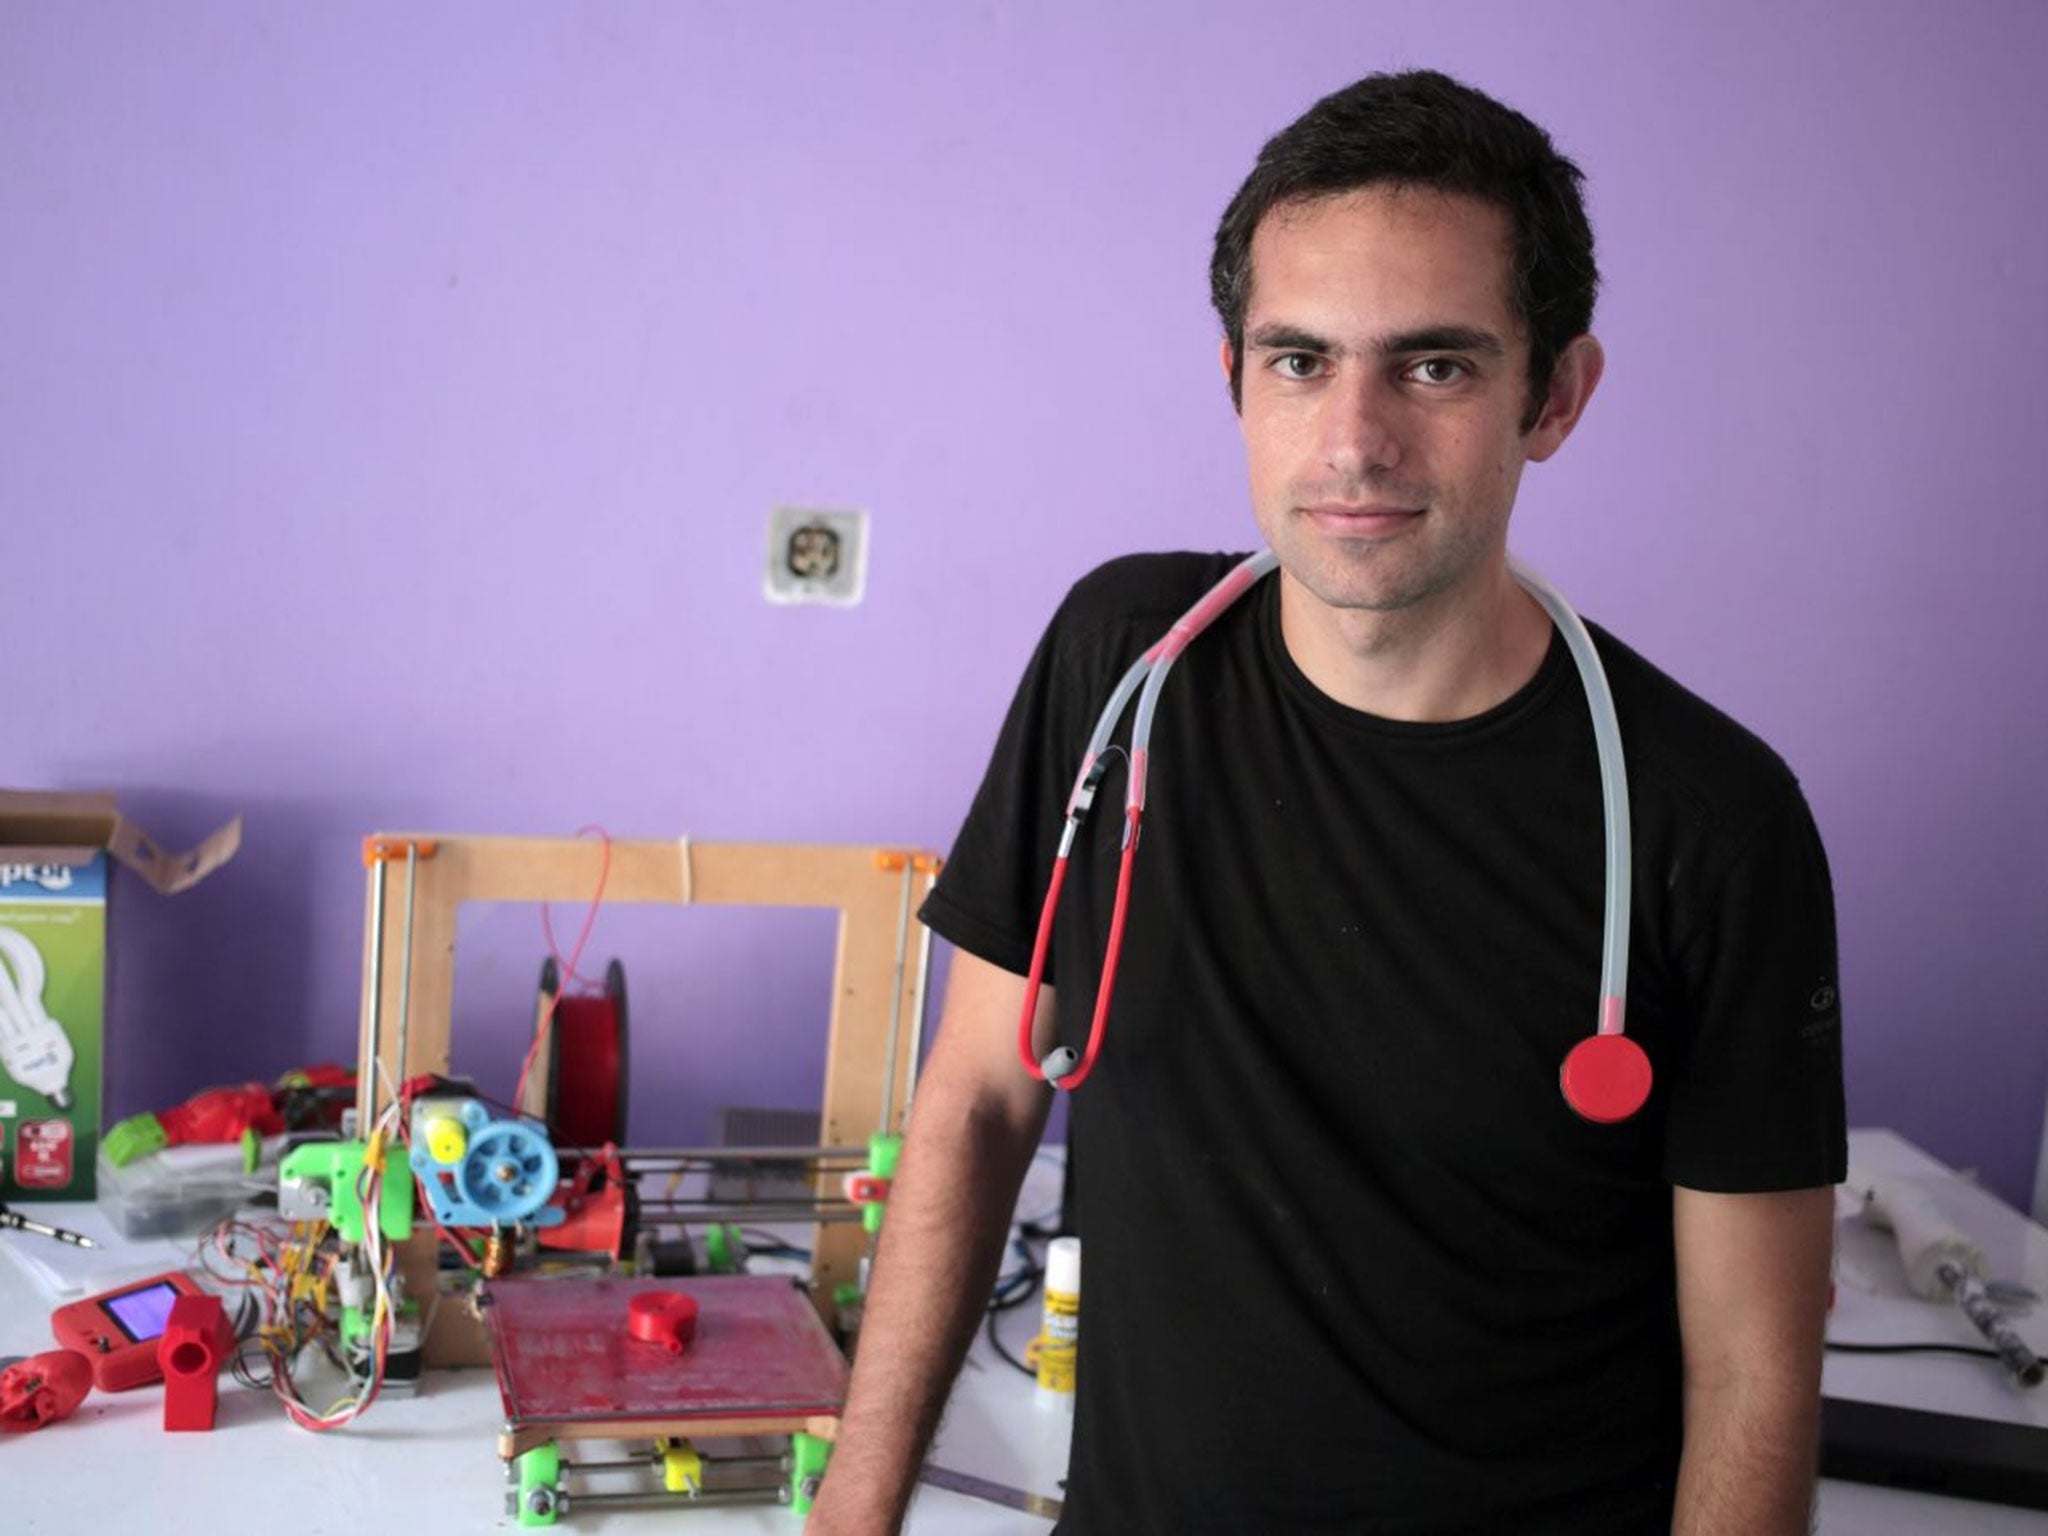 Dr Loubani says the stethoscope that can be made by a 3-D printer for just $2.50.